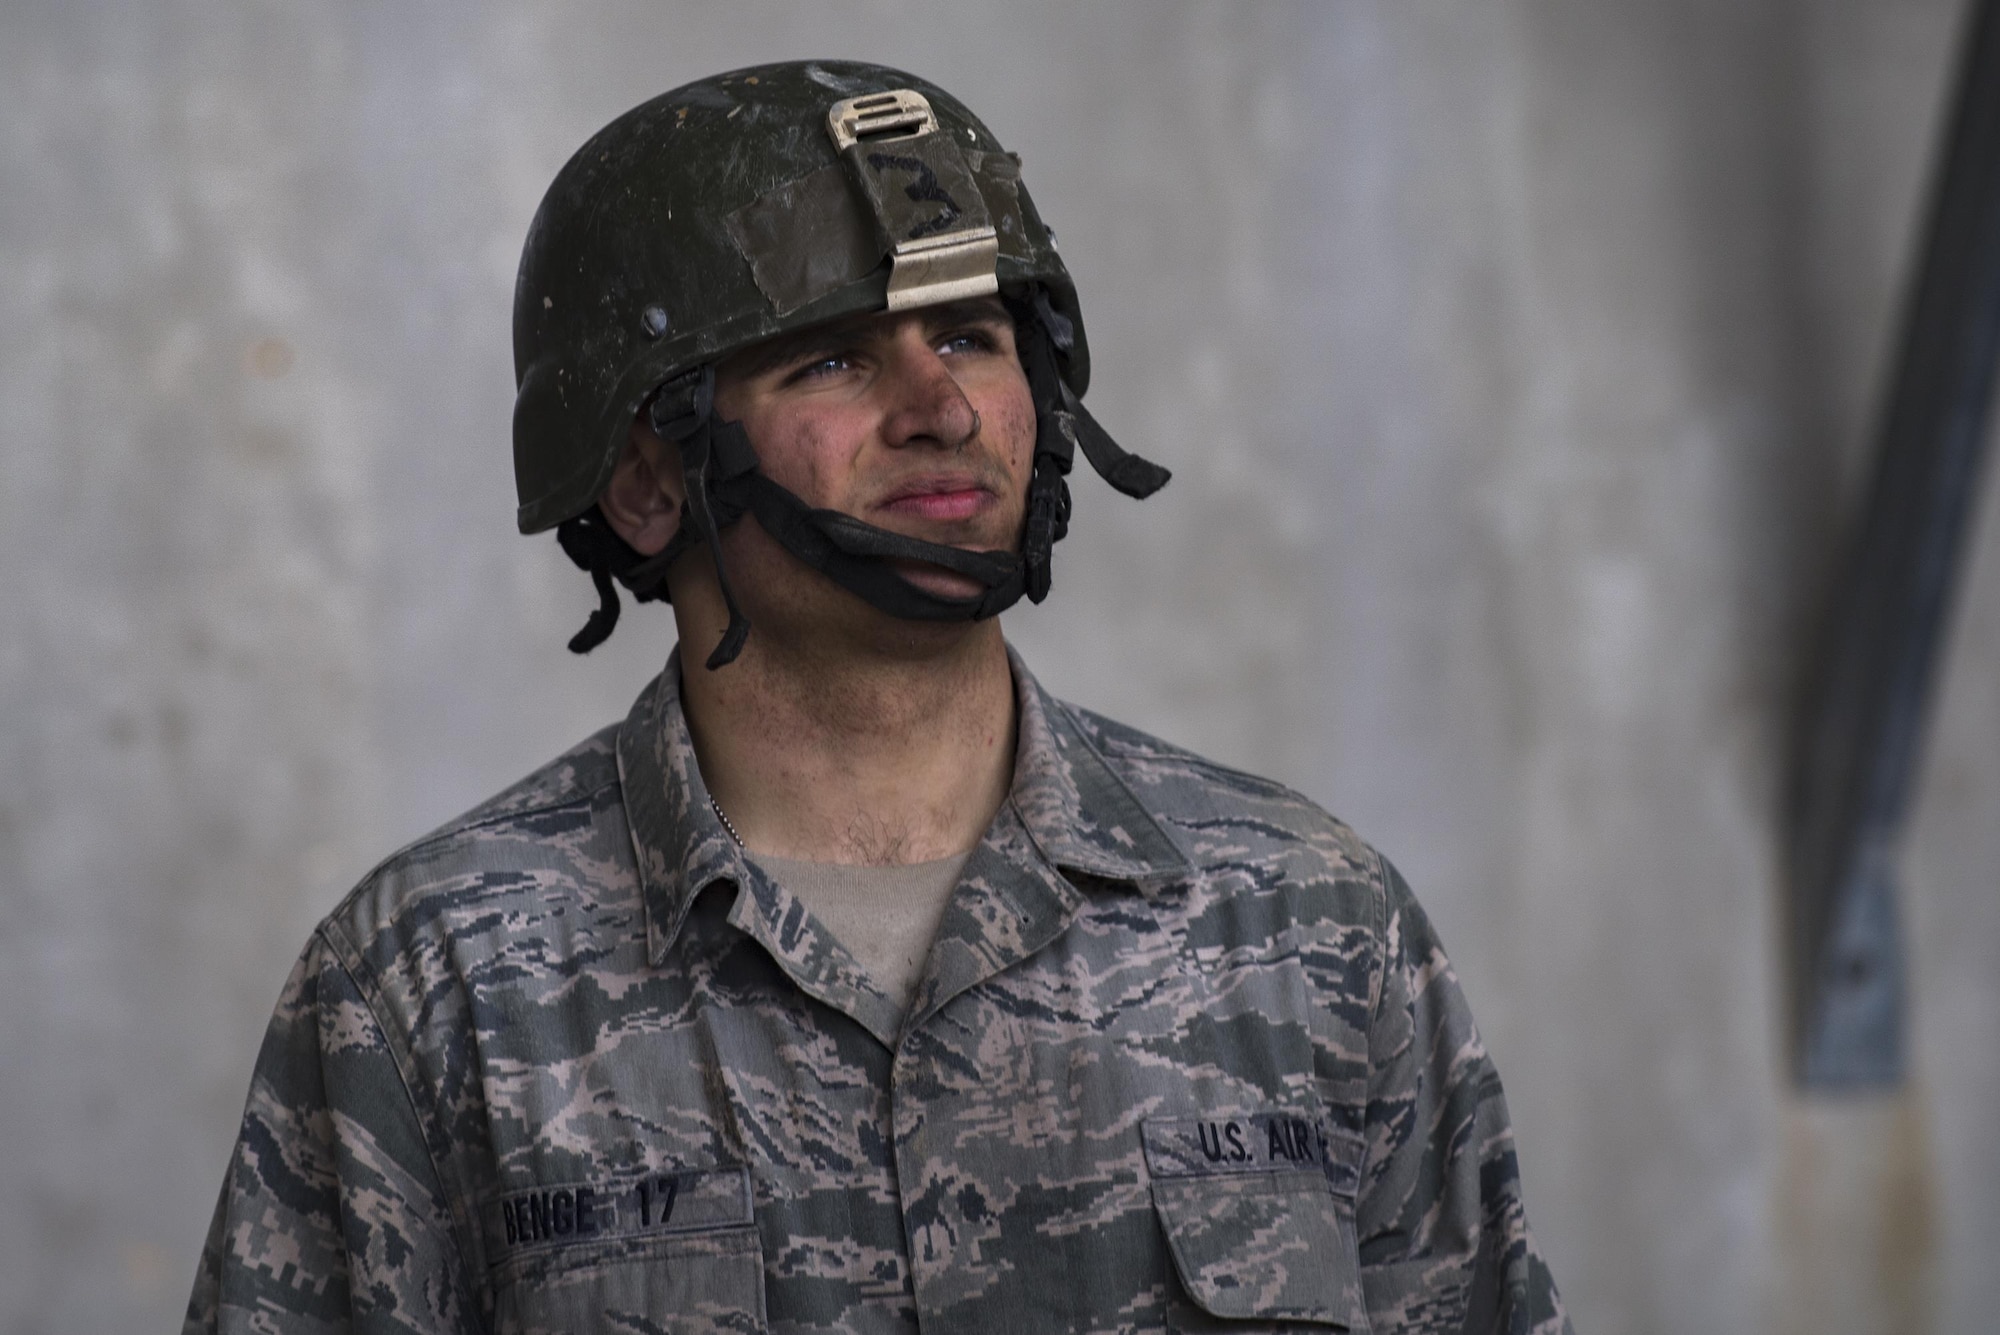 Air Force Academy Cadet Benge waits for his next instruction during an Air Liaison Officer Aptitude Assessment, Feb. 14, 2017, at Camp Bullis, Texas. The week-long assessment allows current ALOs and enlisted cadre to decide if the cadets are worthy of progressing to the Tactical Air Control Party school house. (U.S. Air Force photo by Airman 1st Class Daniel Snider)